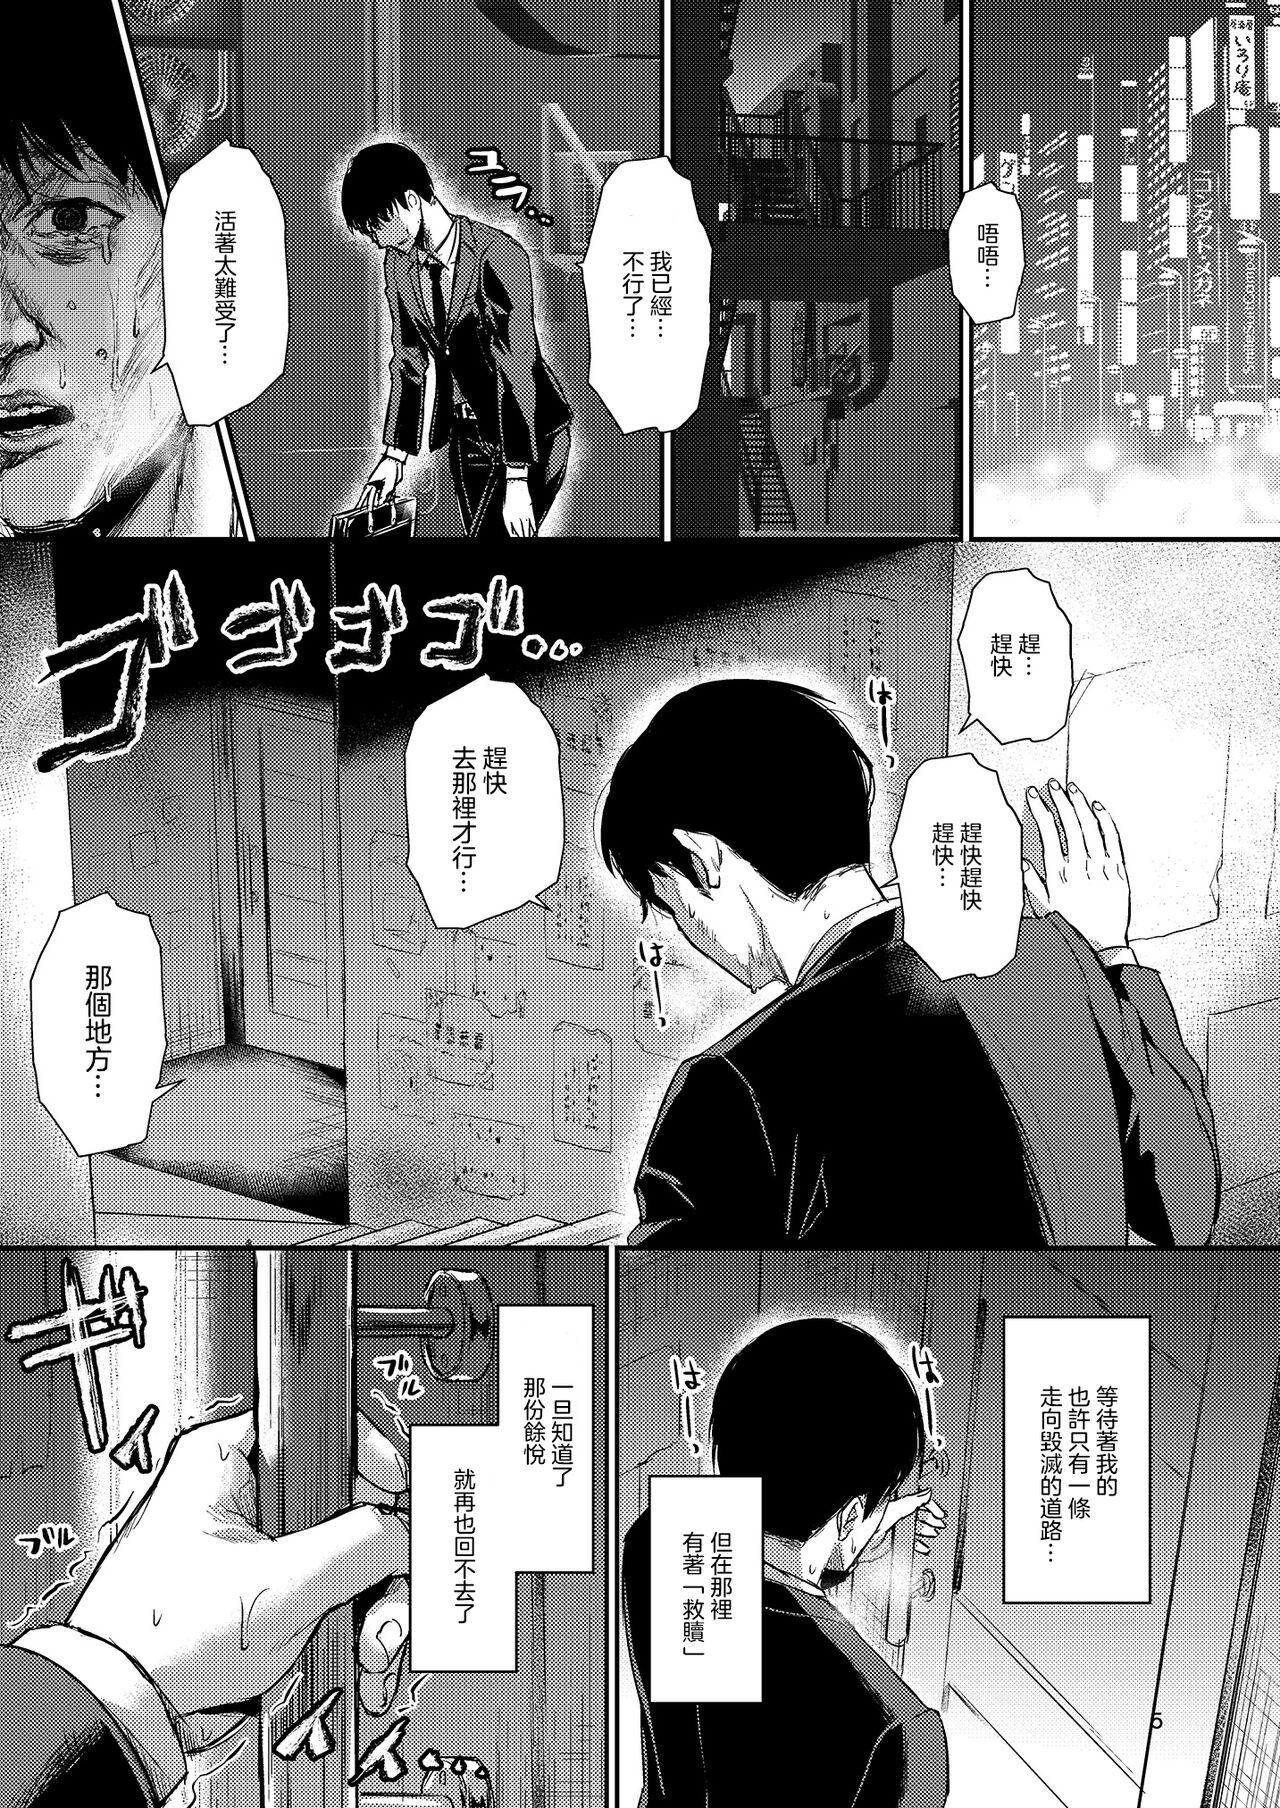 Piercings Homehome Home e Youkoso! - Welcome to Home Home Home! | 歡迎來到誇誇屋！ Sister - Page 6